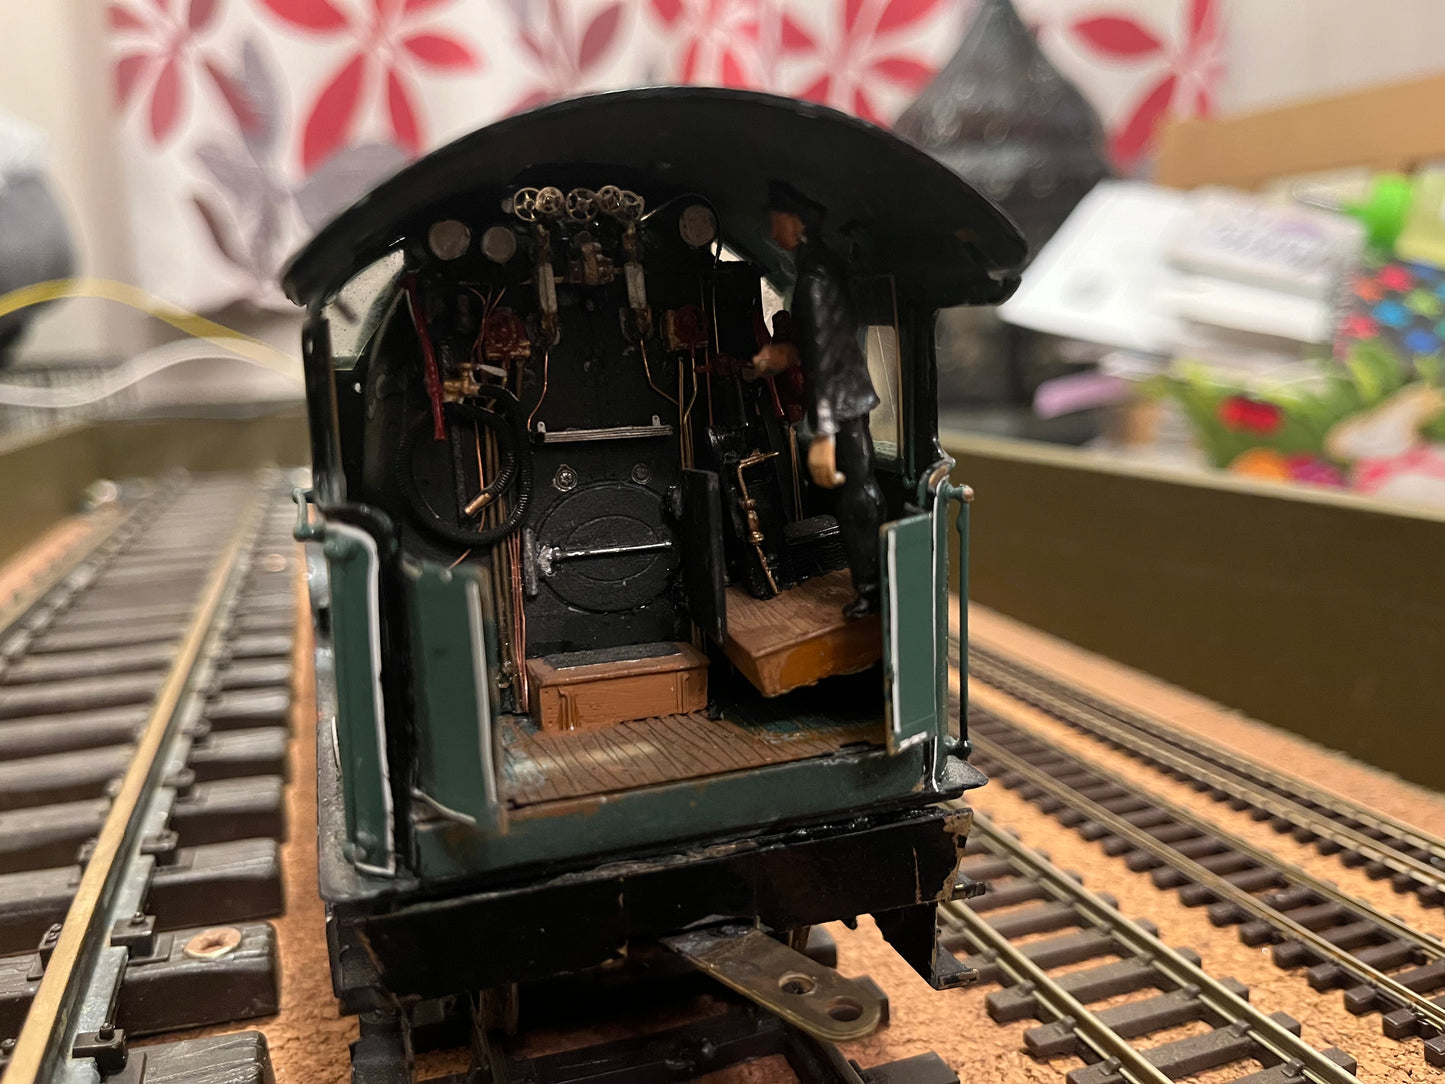 Manufacturer unknown (O) LNER A1/3, No.4475, “Flying Fox” in Apple Green. DCC Sound Fitted and Smoke Generator.